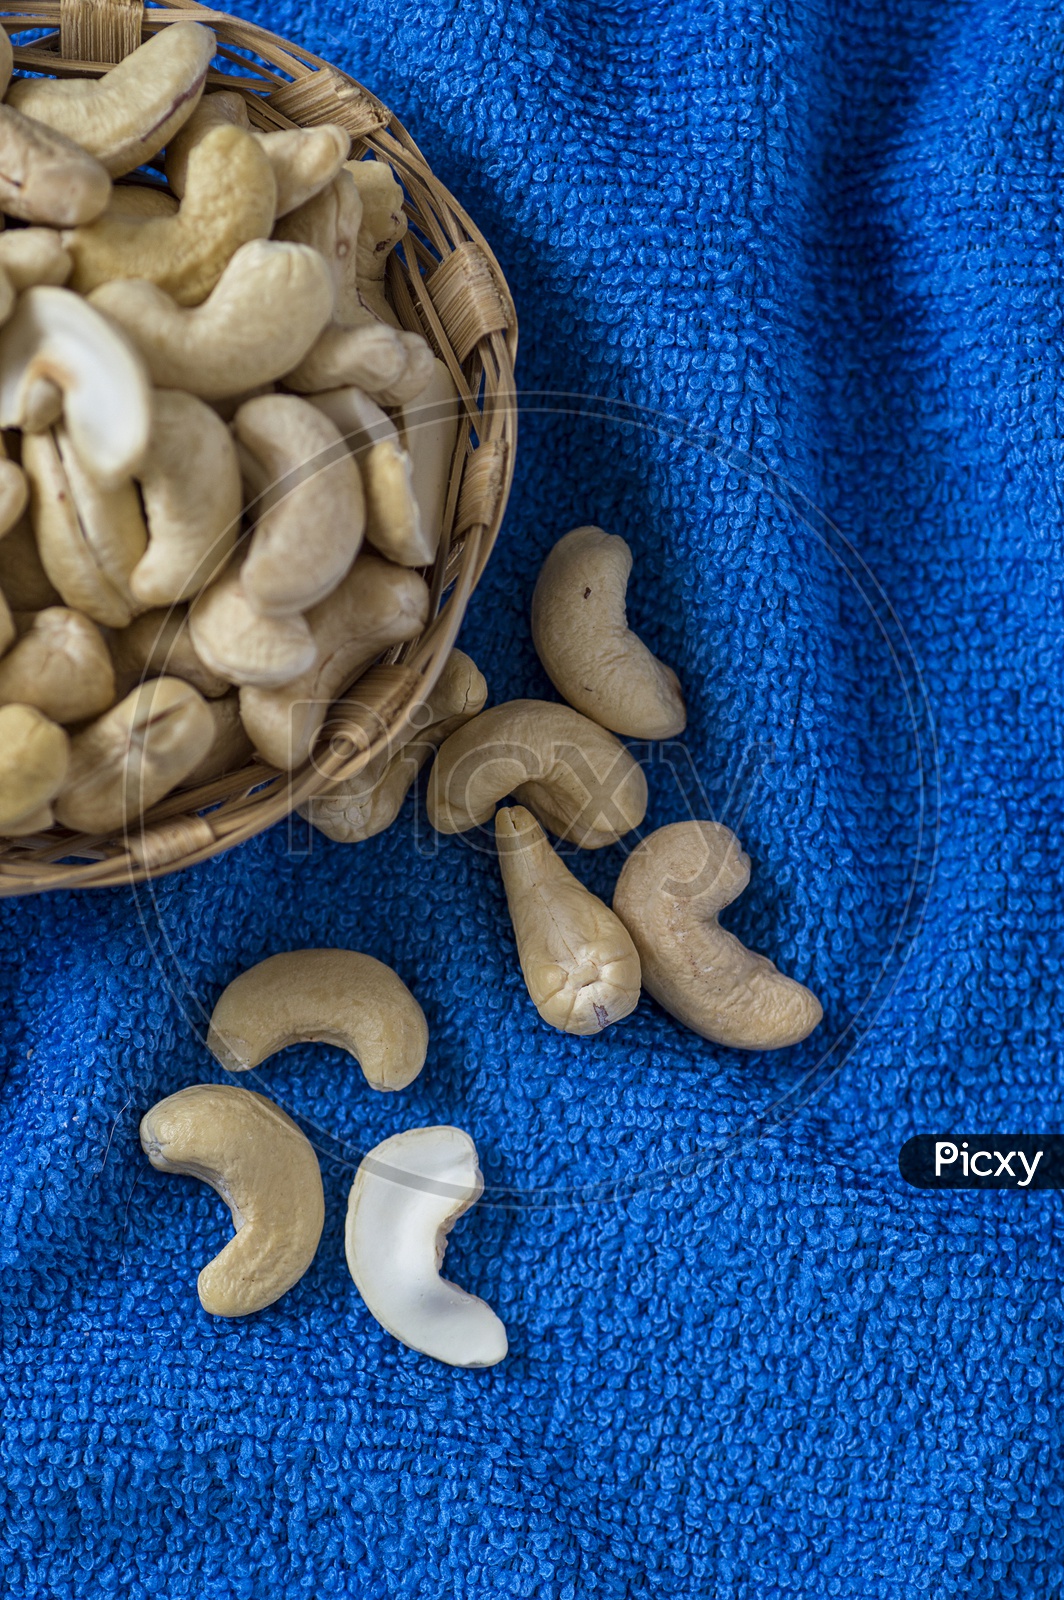 Cashew nuts in a basket on blue cloth